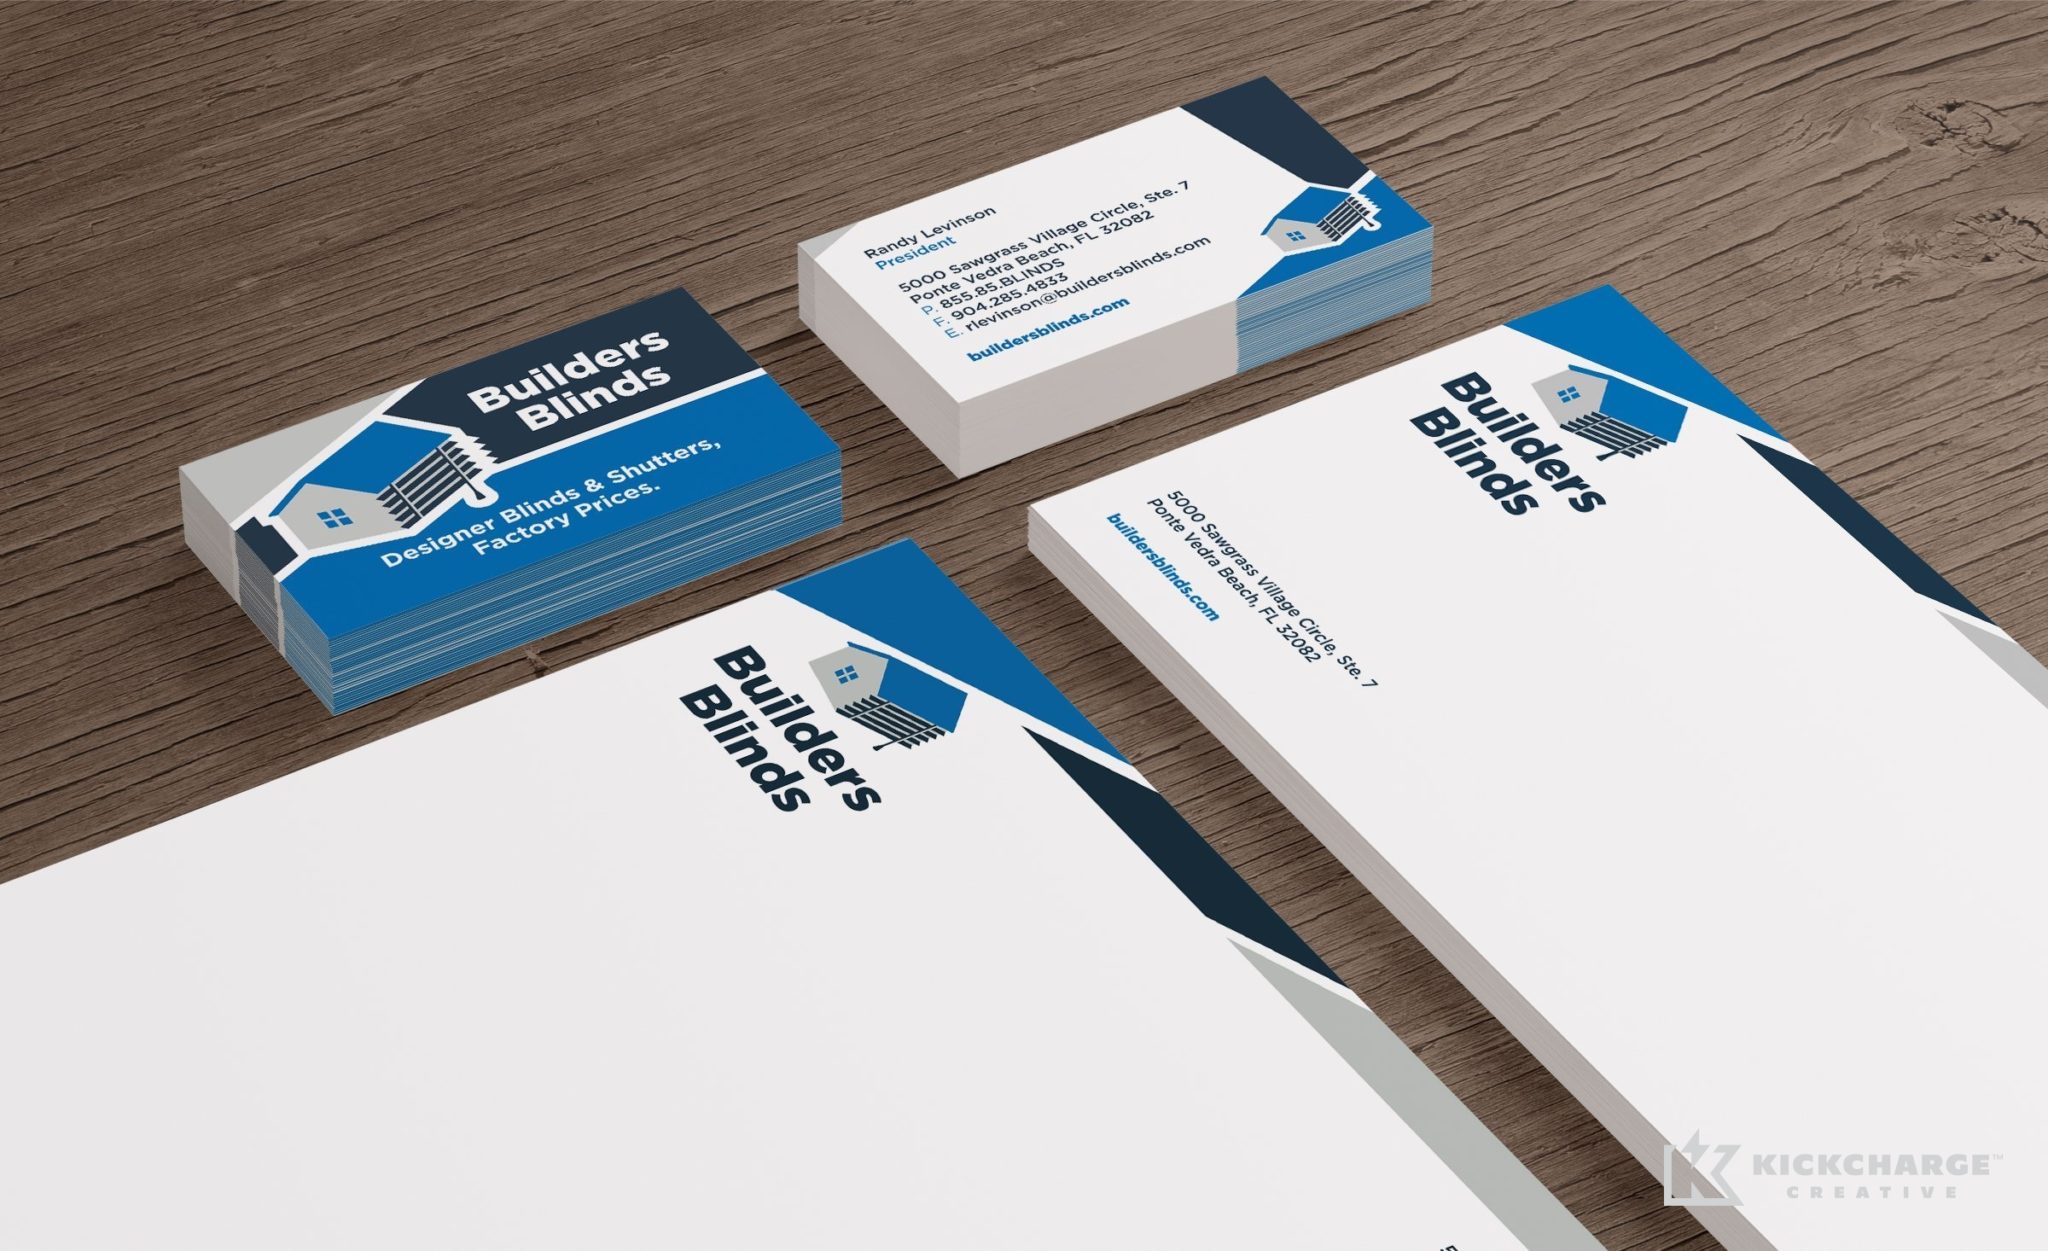 Stationery design for Builders Blinds, a commercial contractor in Florida.